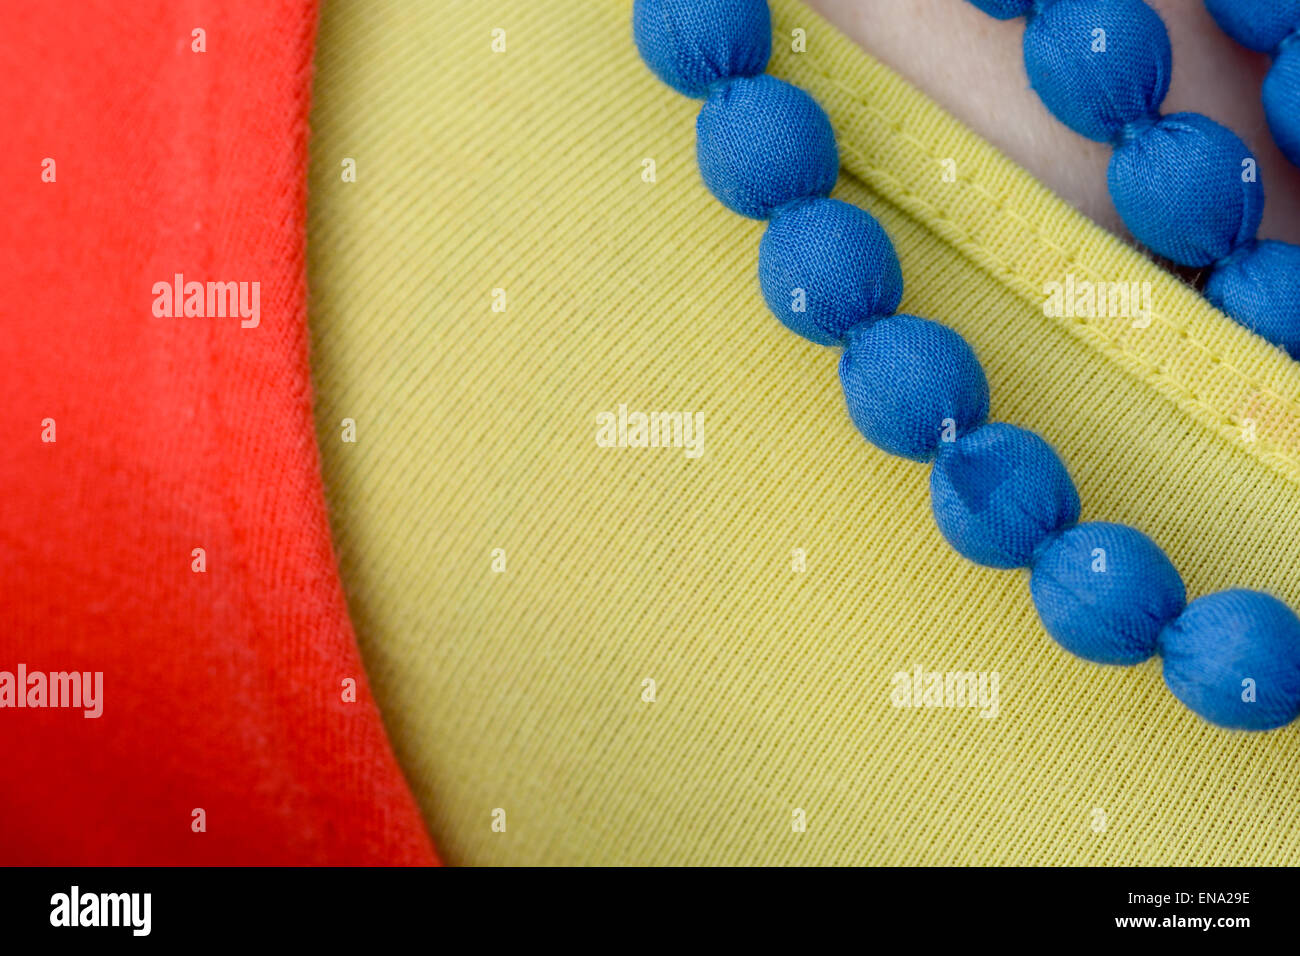 Blue beaded type necklace worn with yellow top and red cardigan Stock Photo